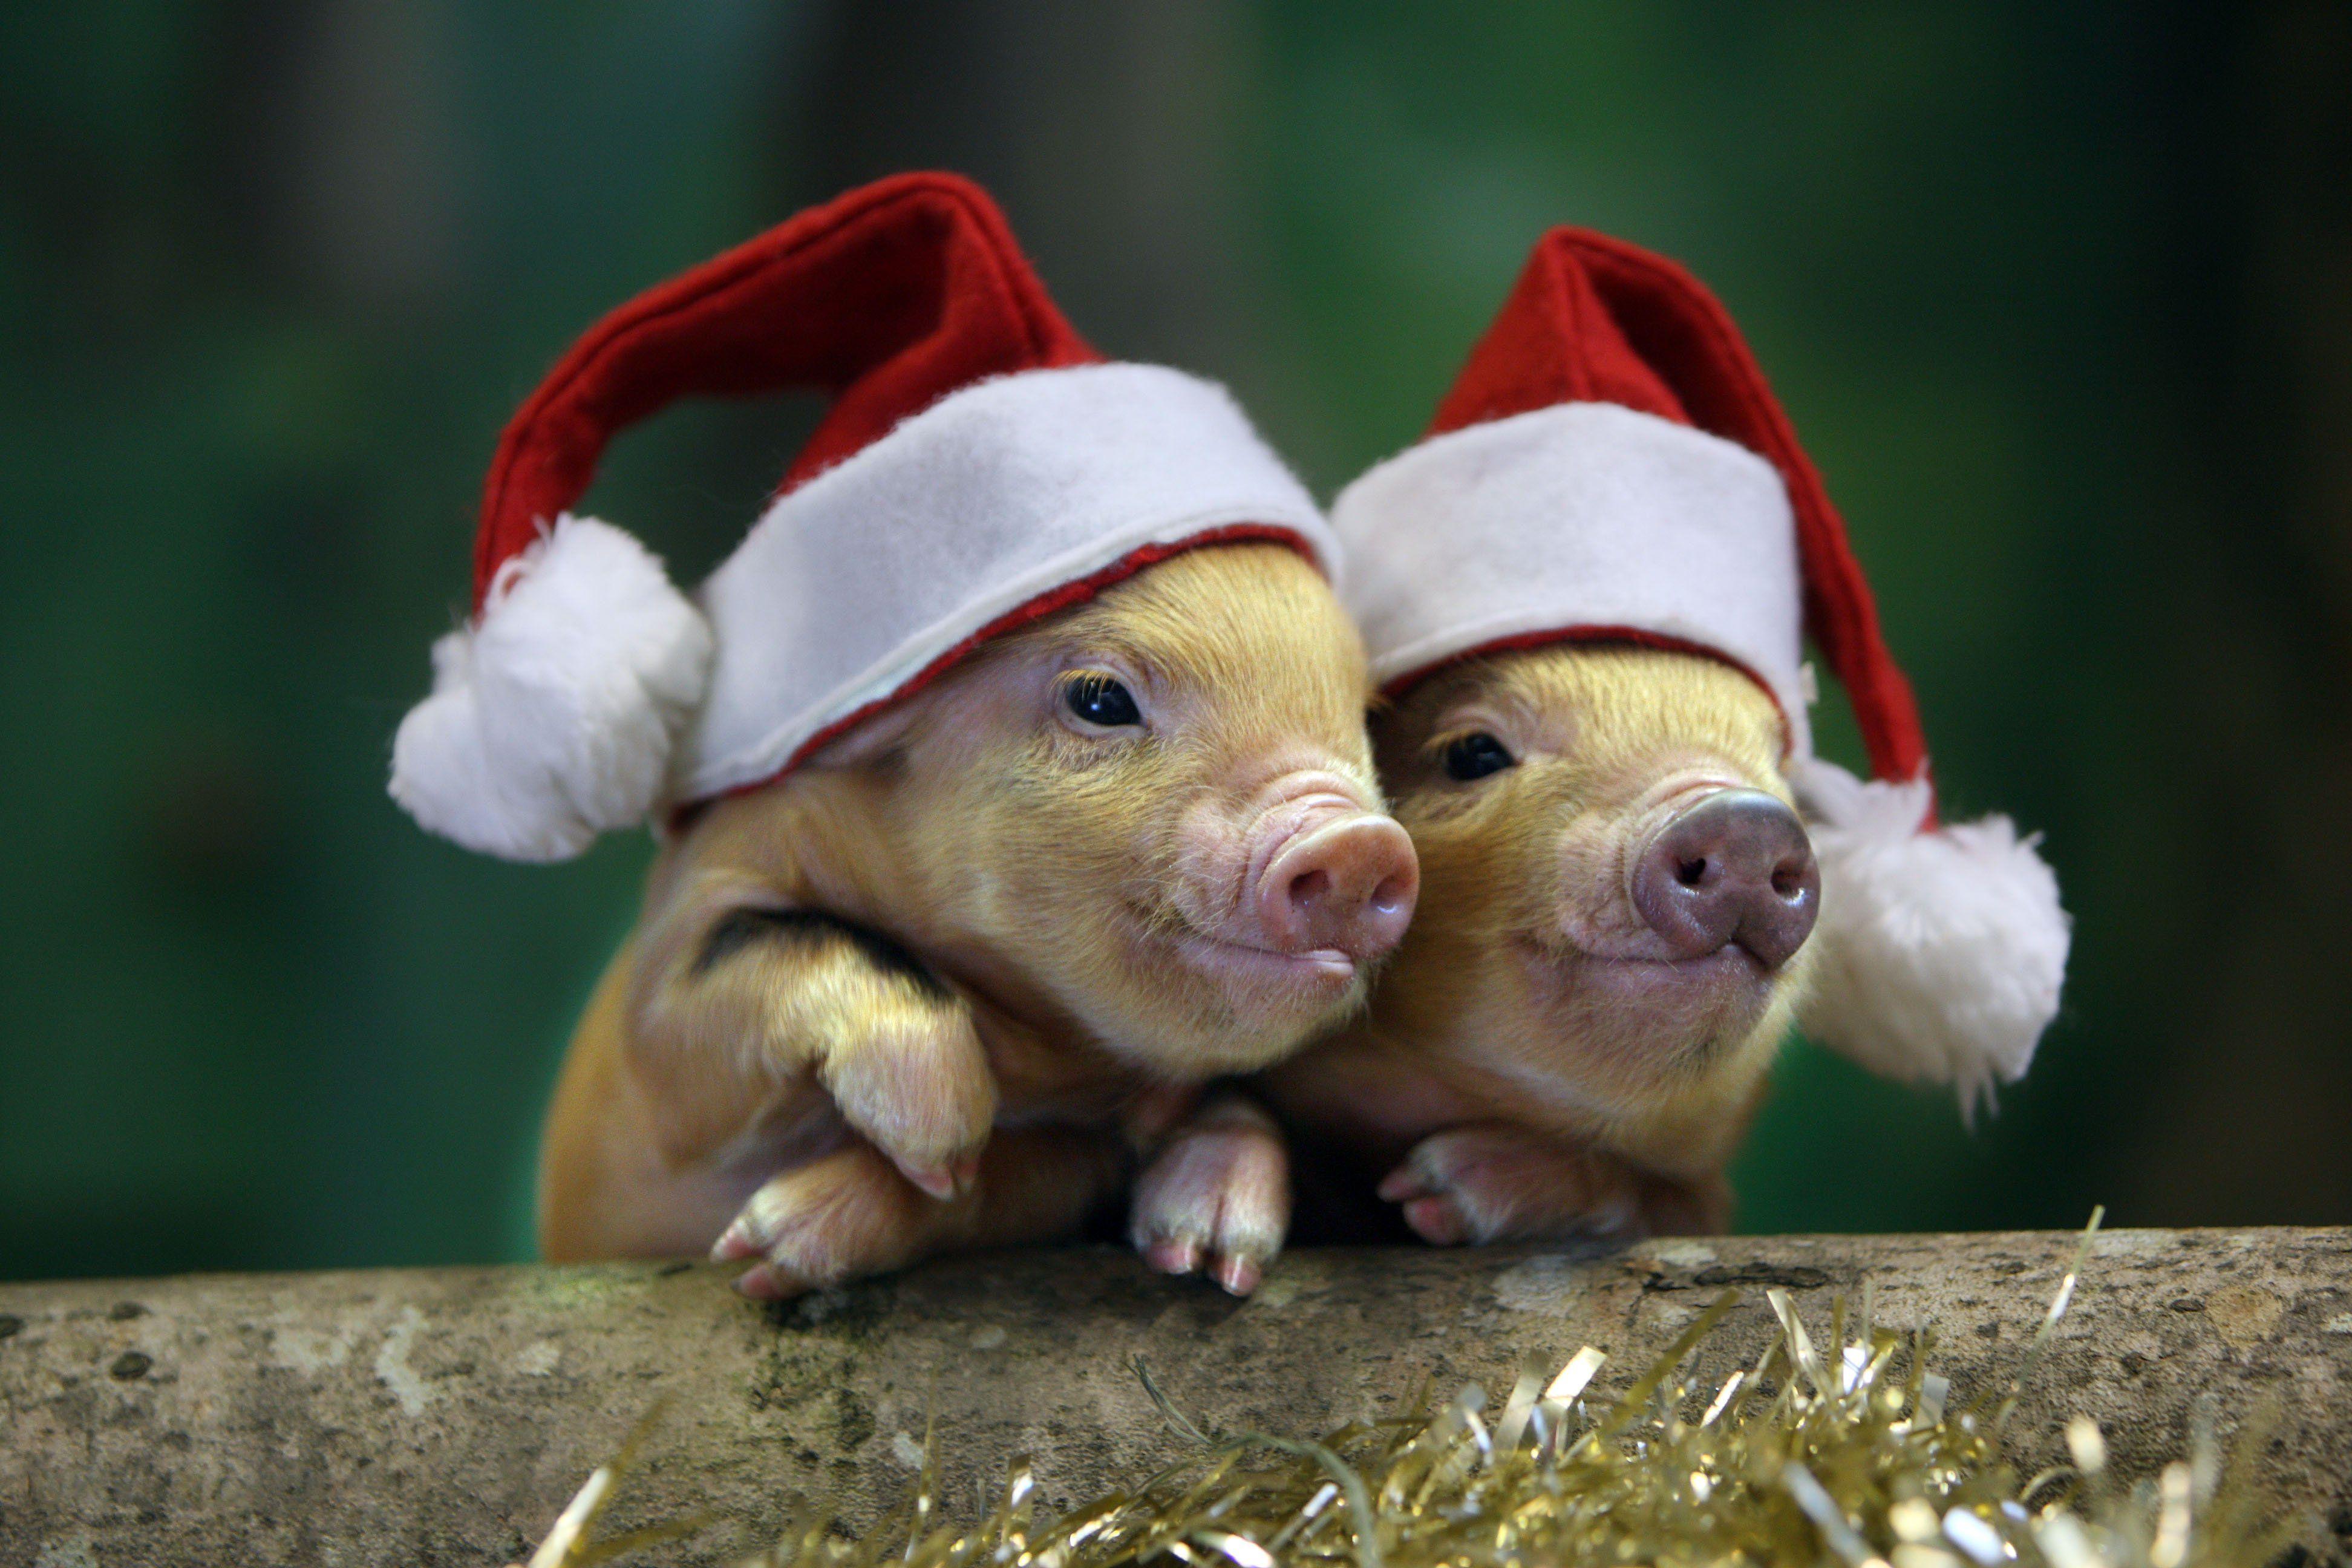 wallpaper Christmas animals - Image Search Results